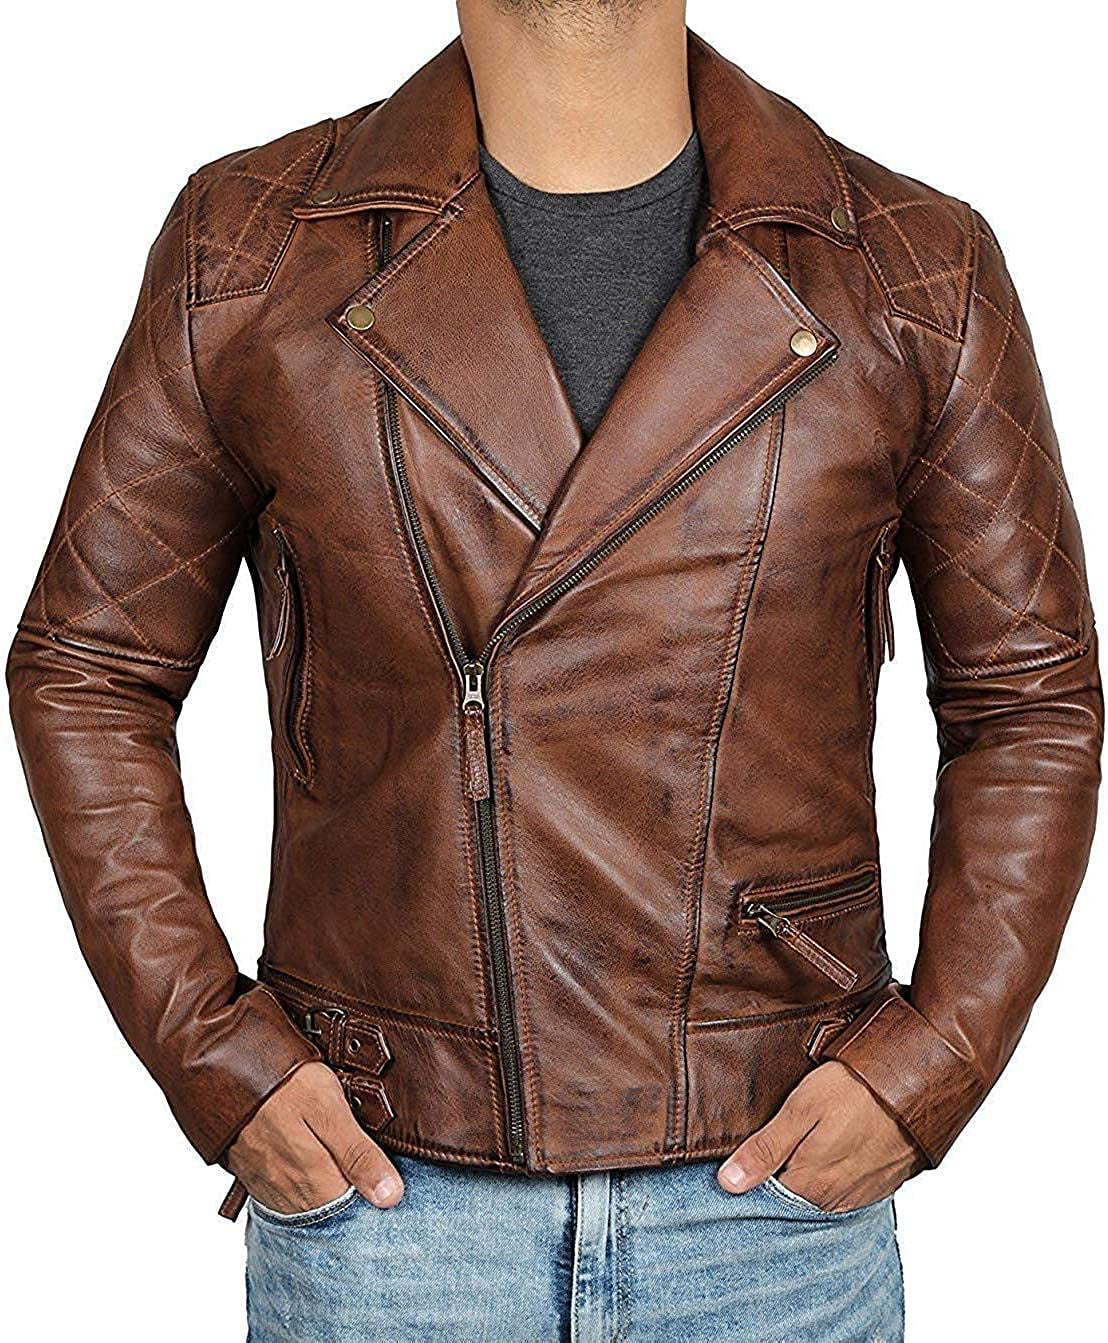 Decrum Asymmetrical Womens Leather Jacket Real Lambskin Leather Jackets for Women